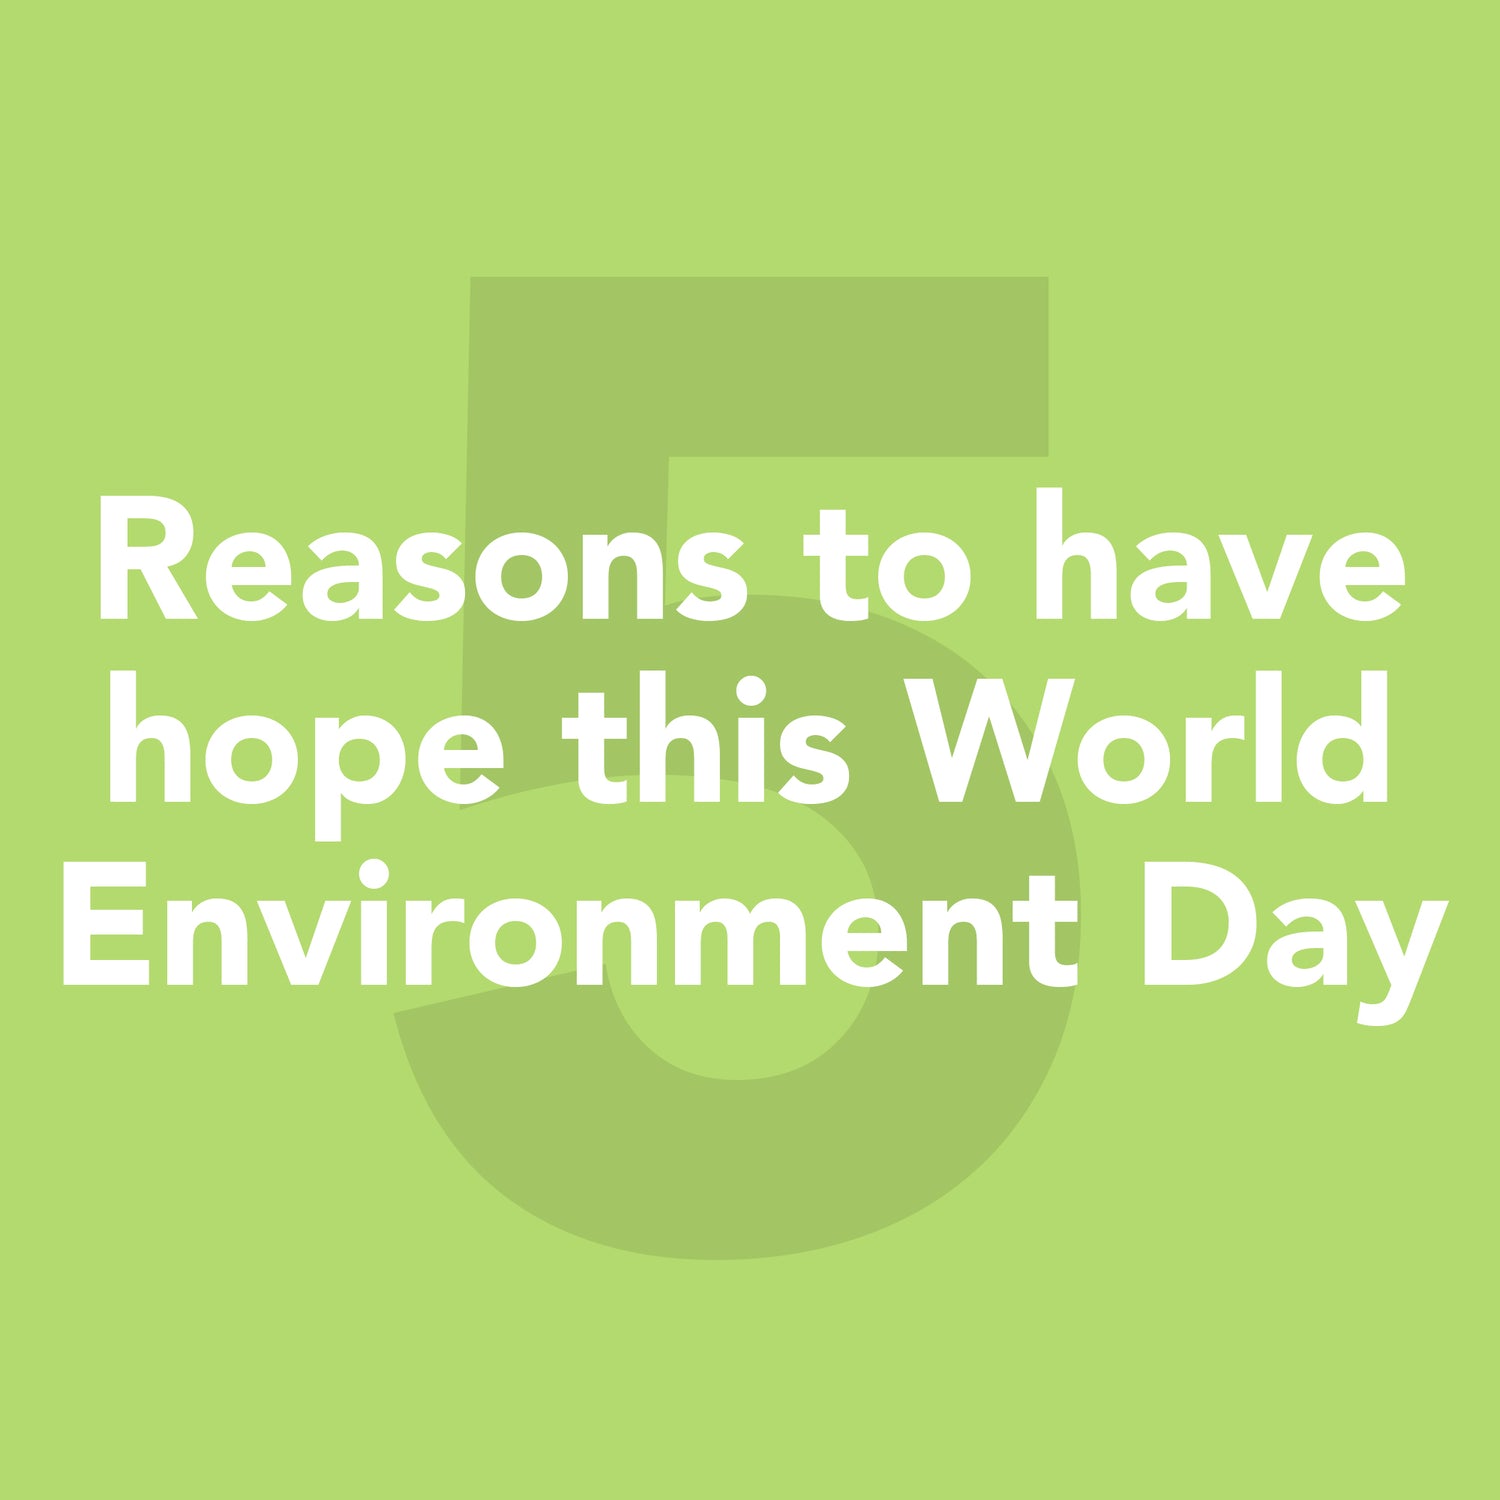 Five reasons to have hope this World Environment Day